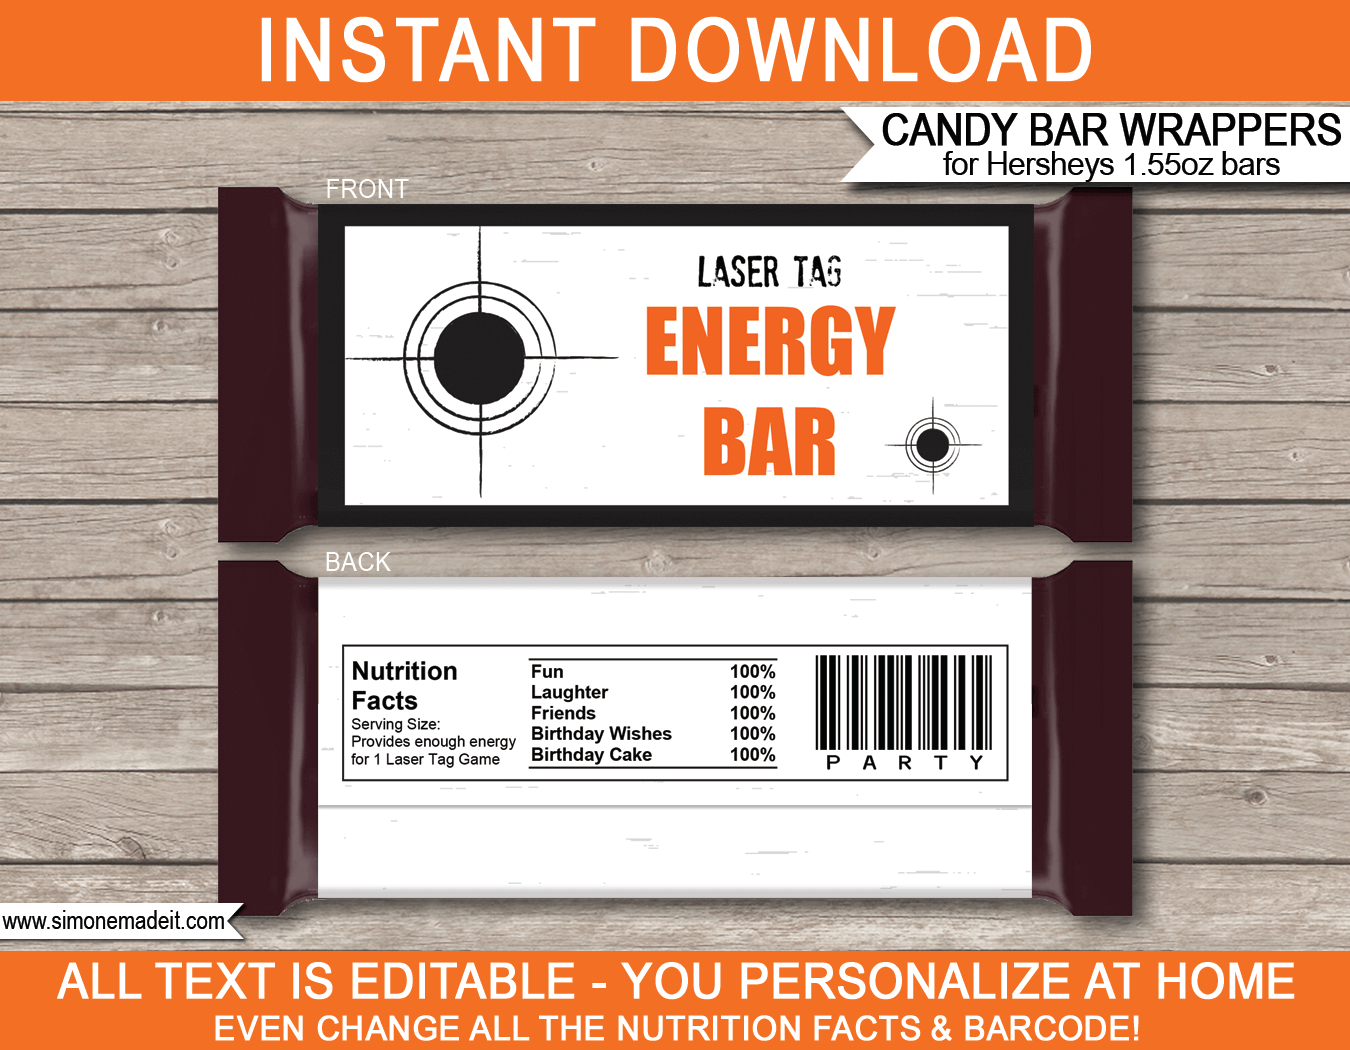 Laser Tag Candy Bar Wrappers | Birthday Party Favors | Personalized Candy Bars | Hershey Chocolate Bars | Editable Template | INSTANT DOWNLOAD $3.00 via simonemadeit.com